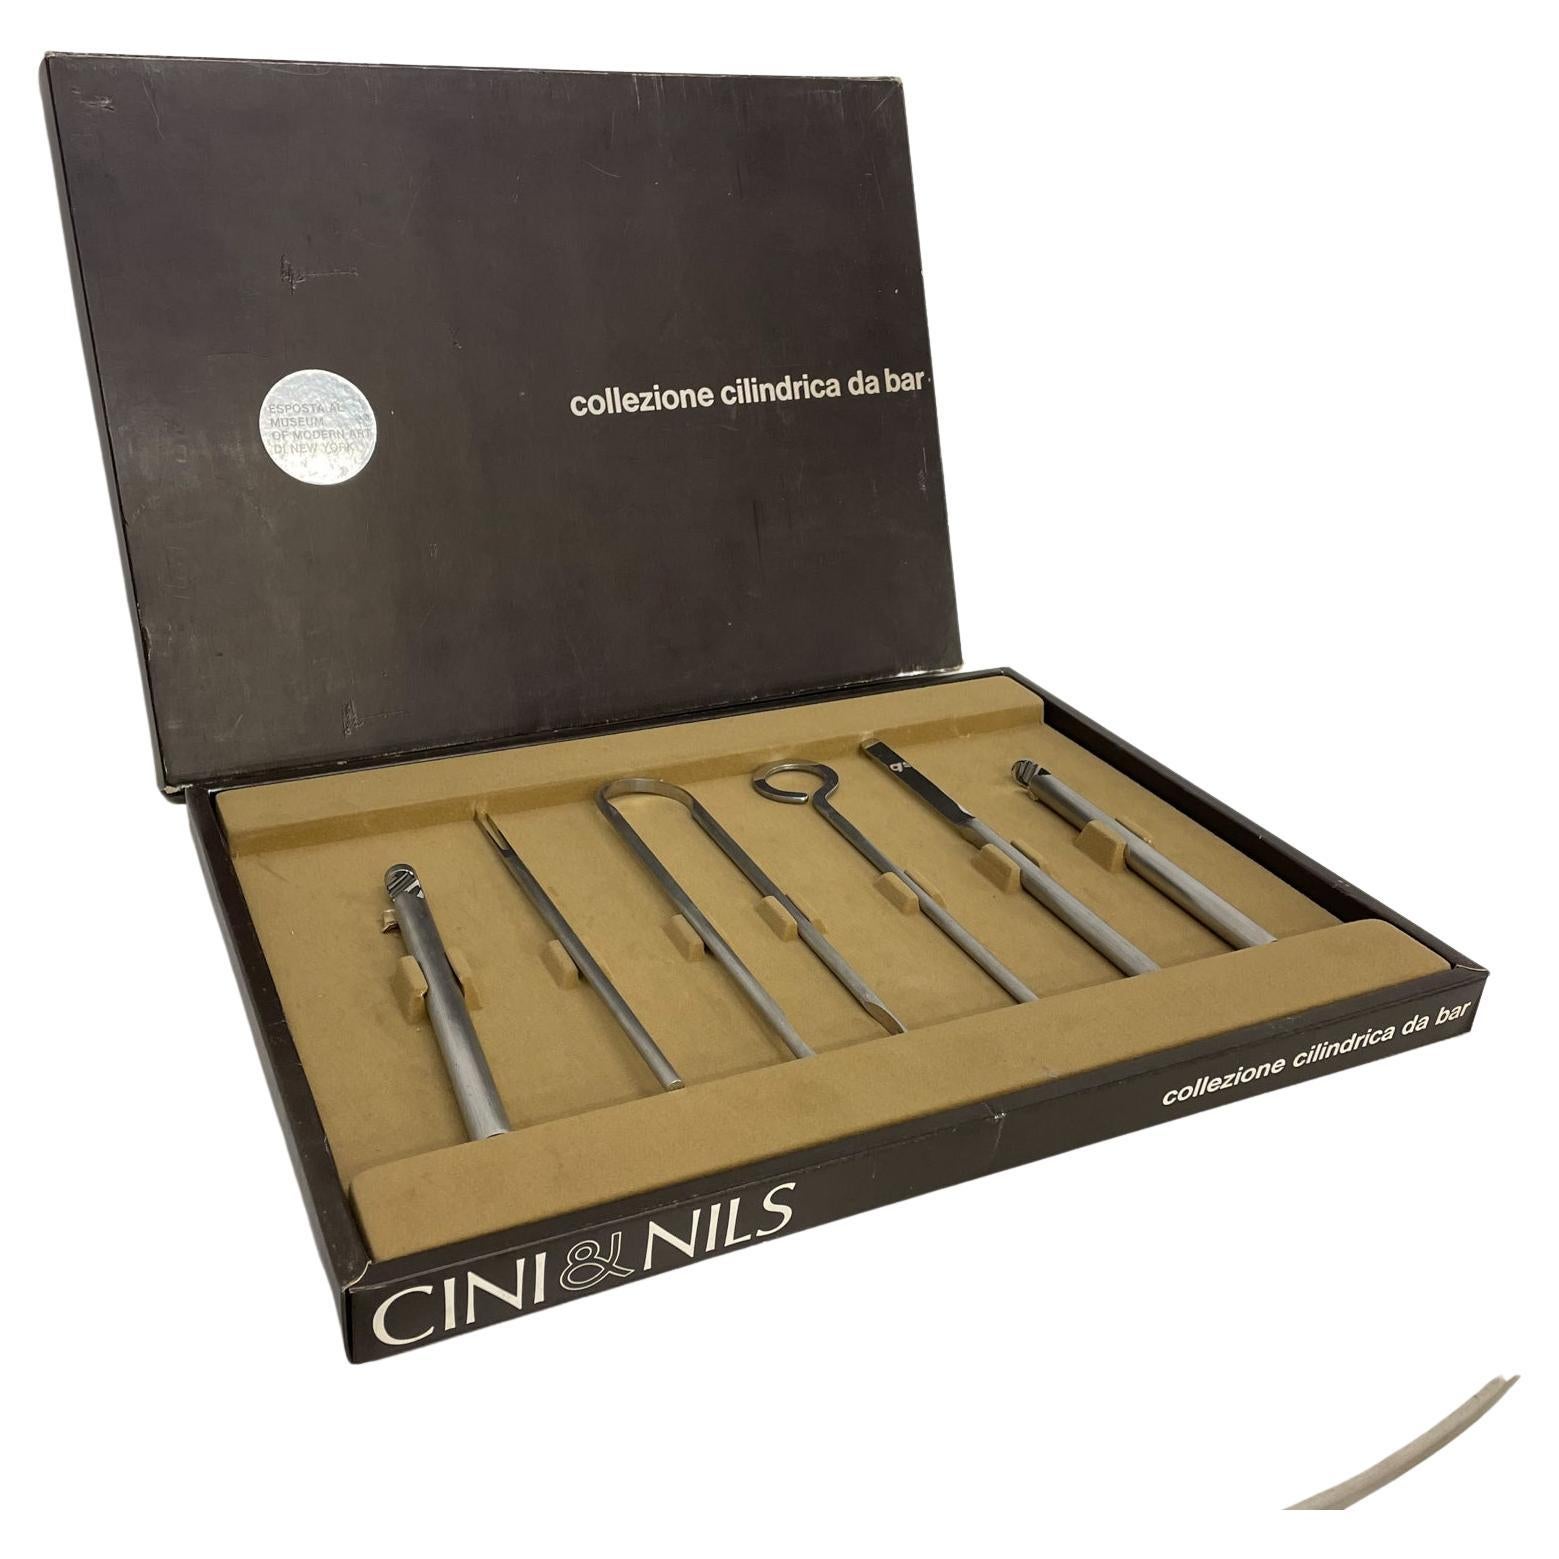 Cini & Nils ITALY Studio OPI Milano Barware Tool Set
Architectural collectible design
MoMA New York 1969 Studio Milano OPI Bar Tools
Cylinder Collection Uber Modern Stainless Steel six-piece Bar Tool Set
16 x 12 x 1.5 tall
Includes original box in